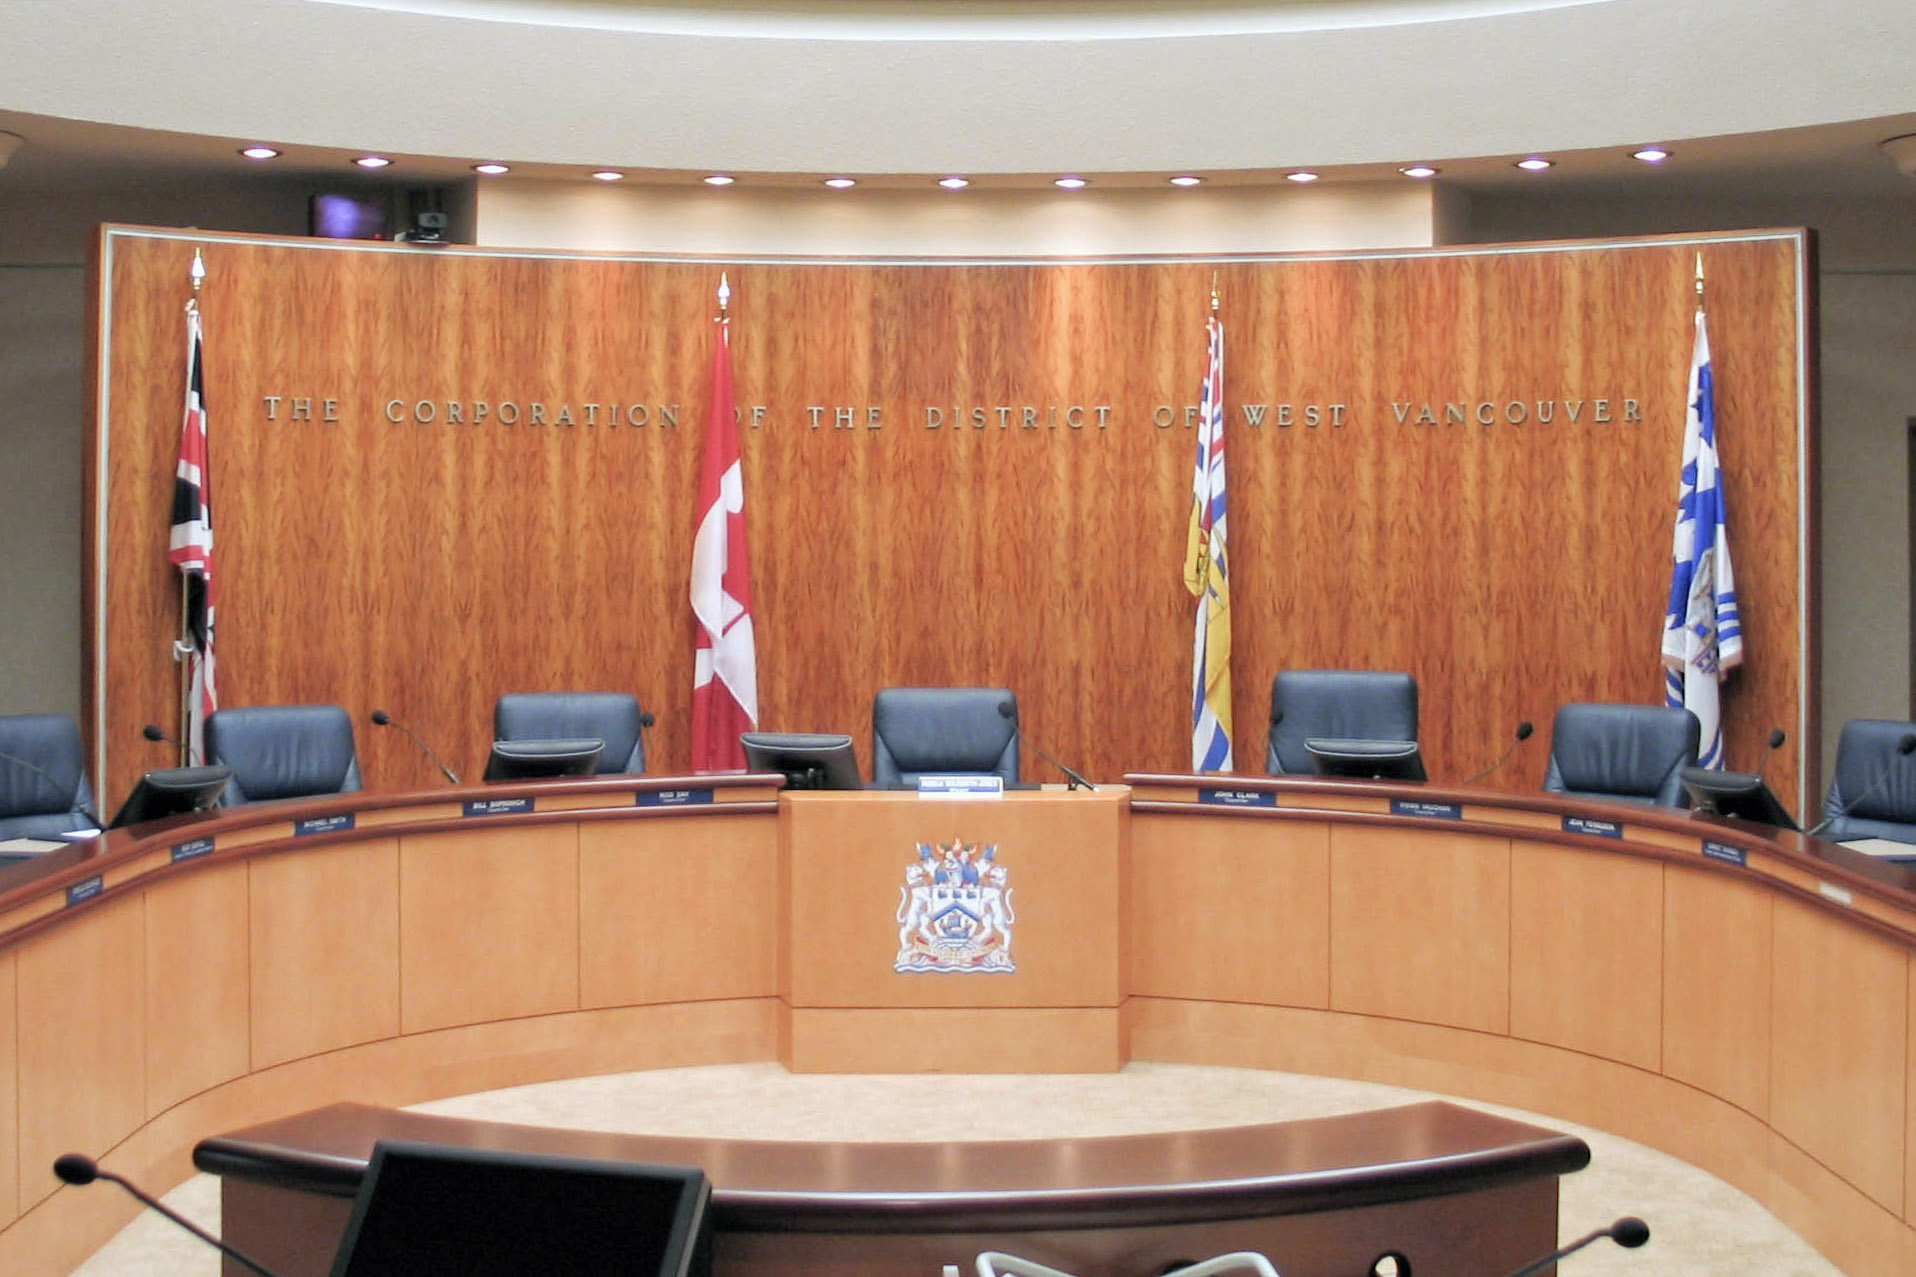 Council meeting room